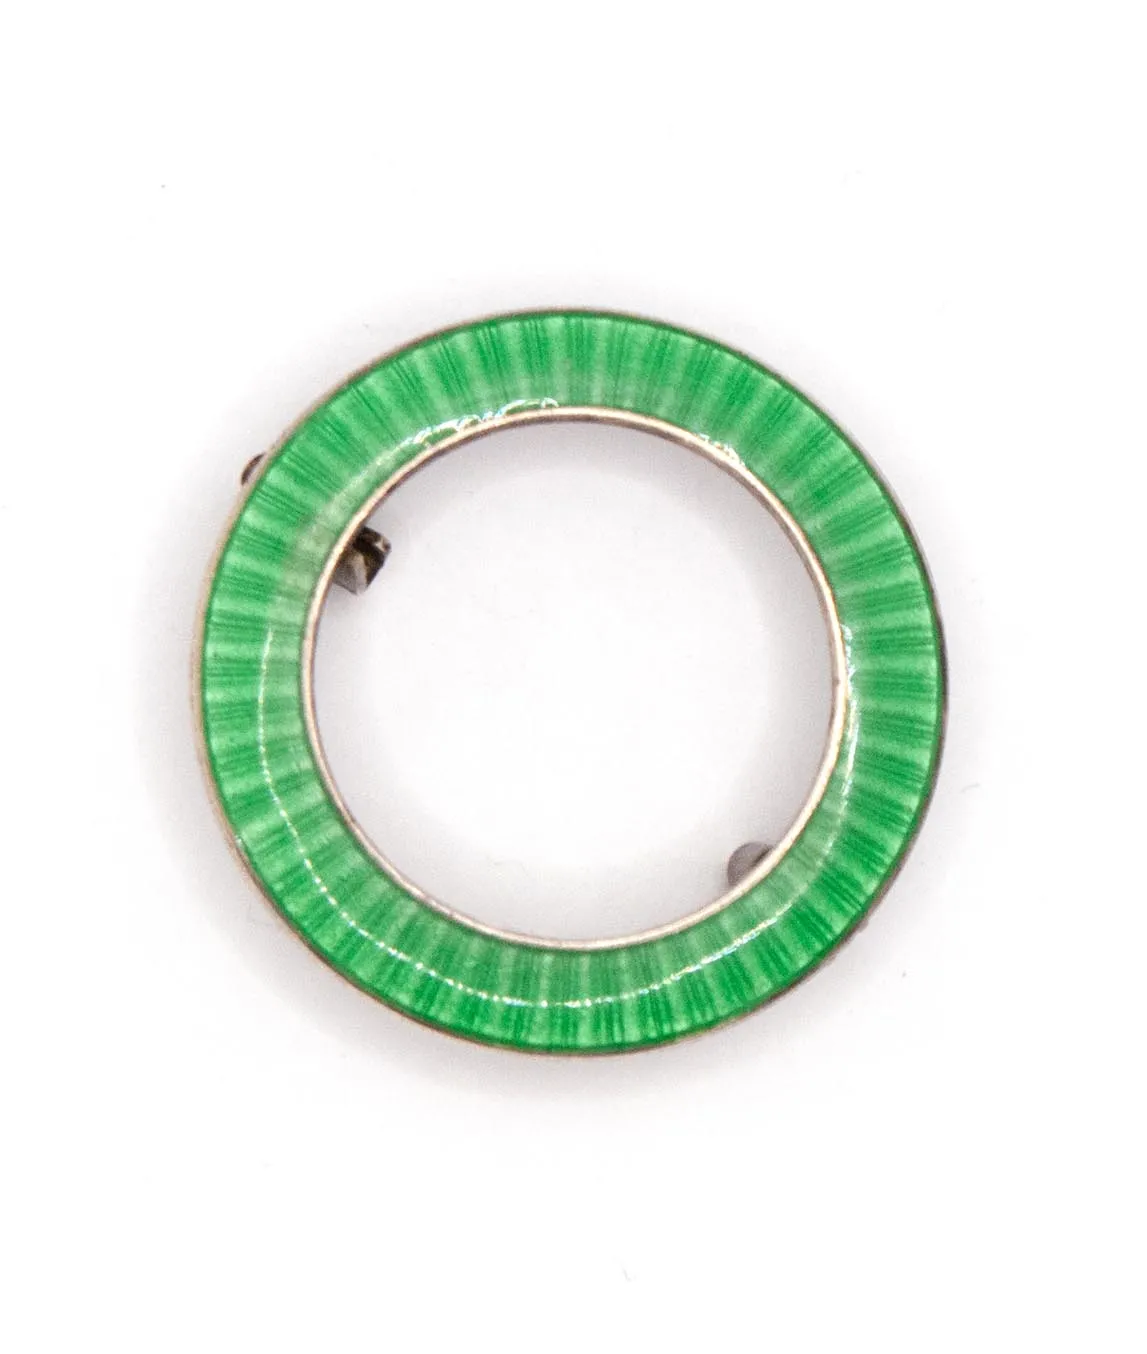 John Atkins & Sons Green enamelled ring shaped brooch pin set in silver on a white background